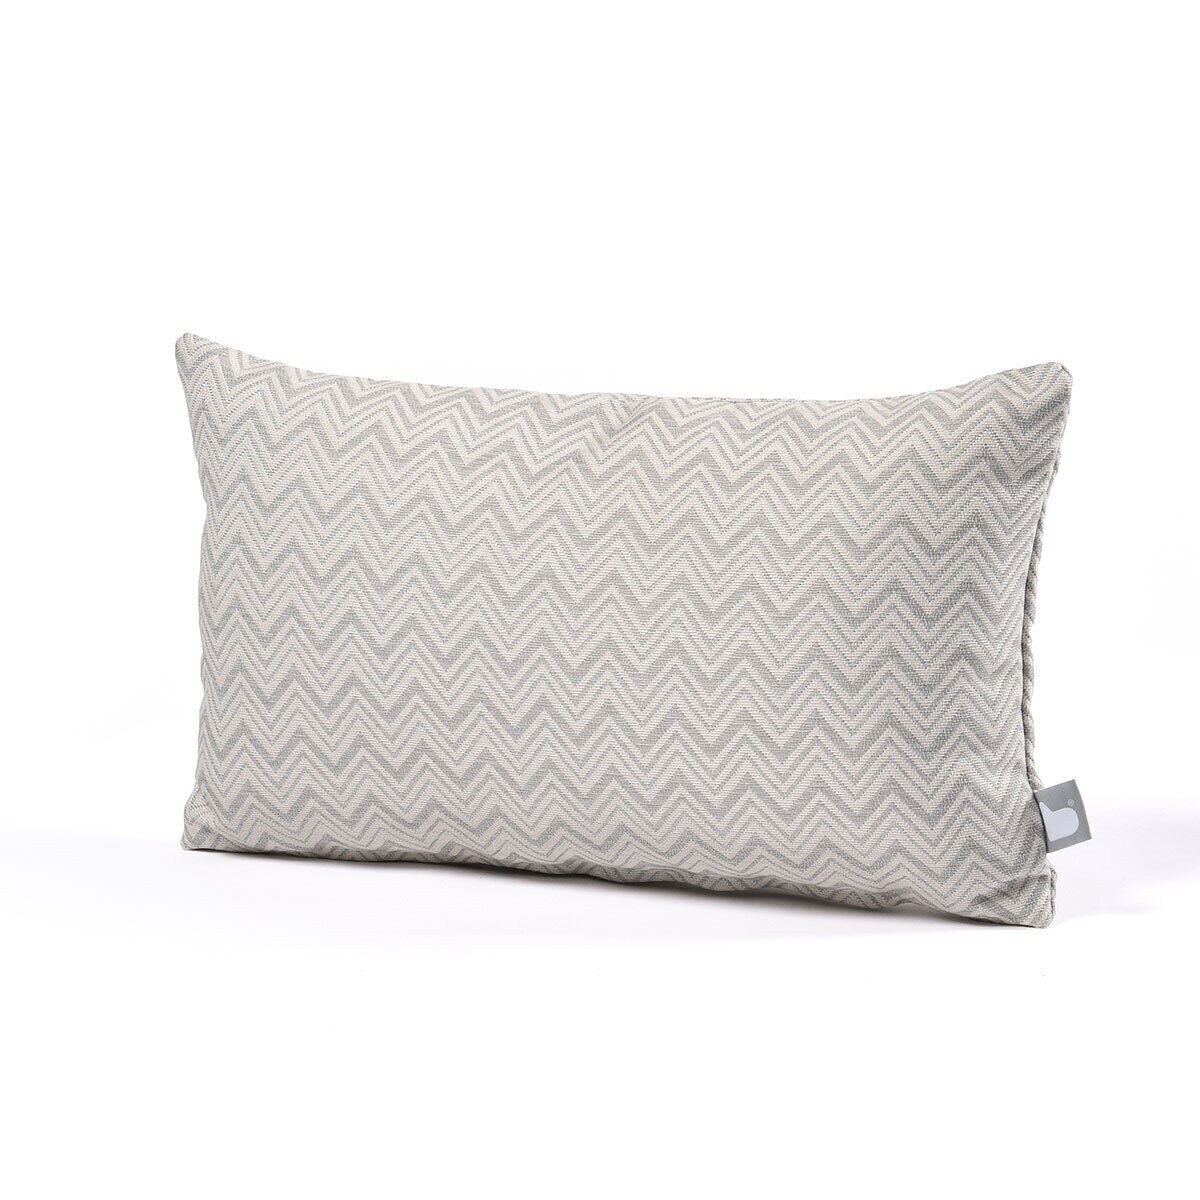 Maze - Pair of Outdoor Bolster Cushions (30x50cm) - Polines Grey product image